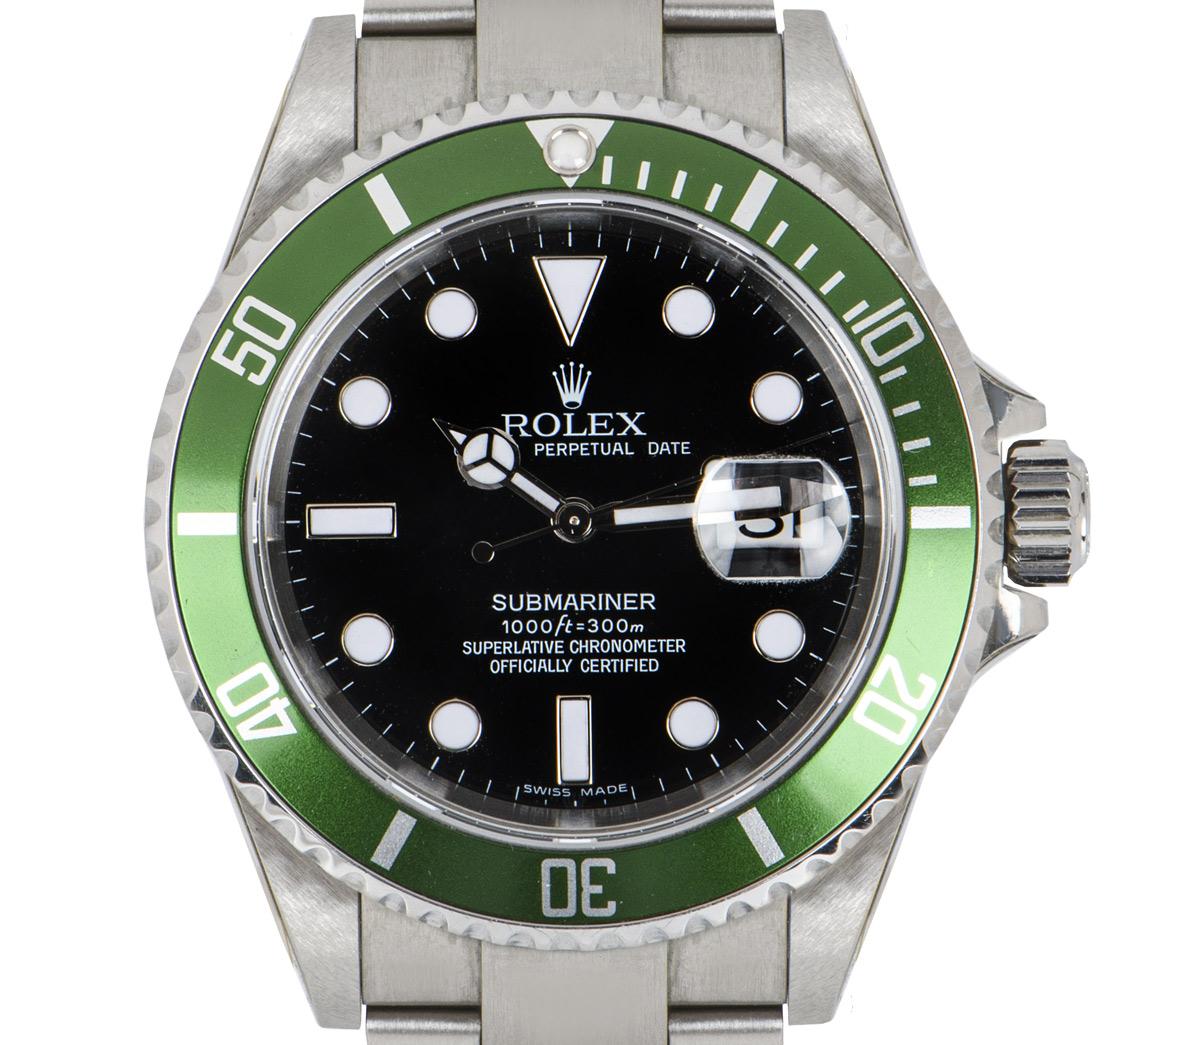 A mens unworn NOS Submariner Date by Rolex in stainless steel, known as a Kermit. Features a black dial and a green unidirectional rotatable bezel with 60-minute graduations. The Oyster bracelet comes equipped with an Oysterlock deployant clasp.